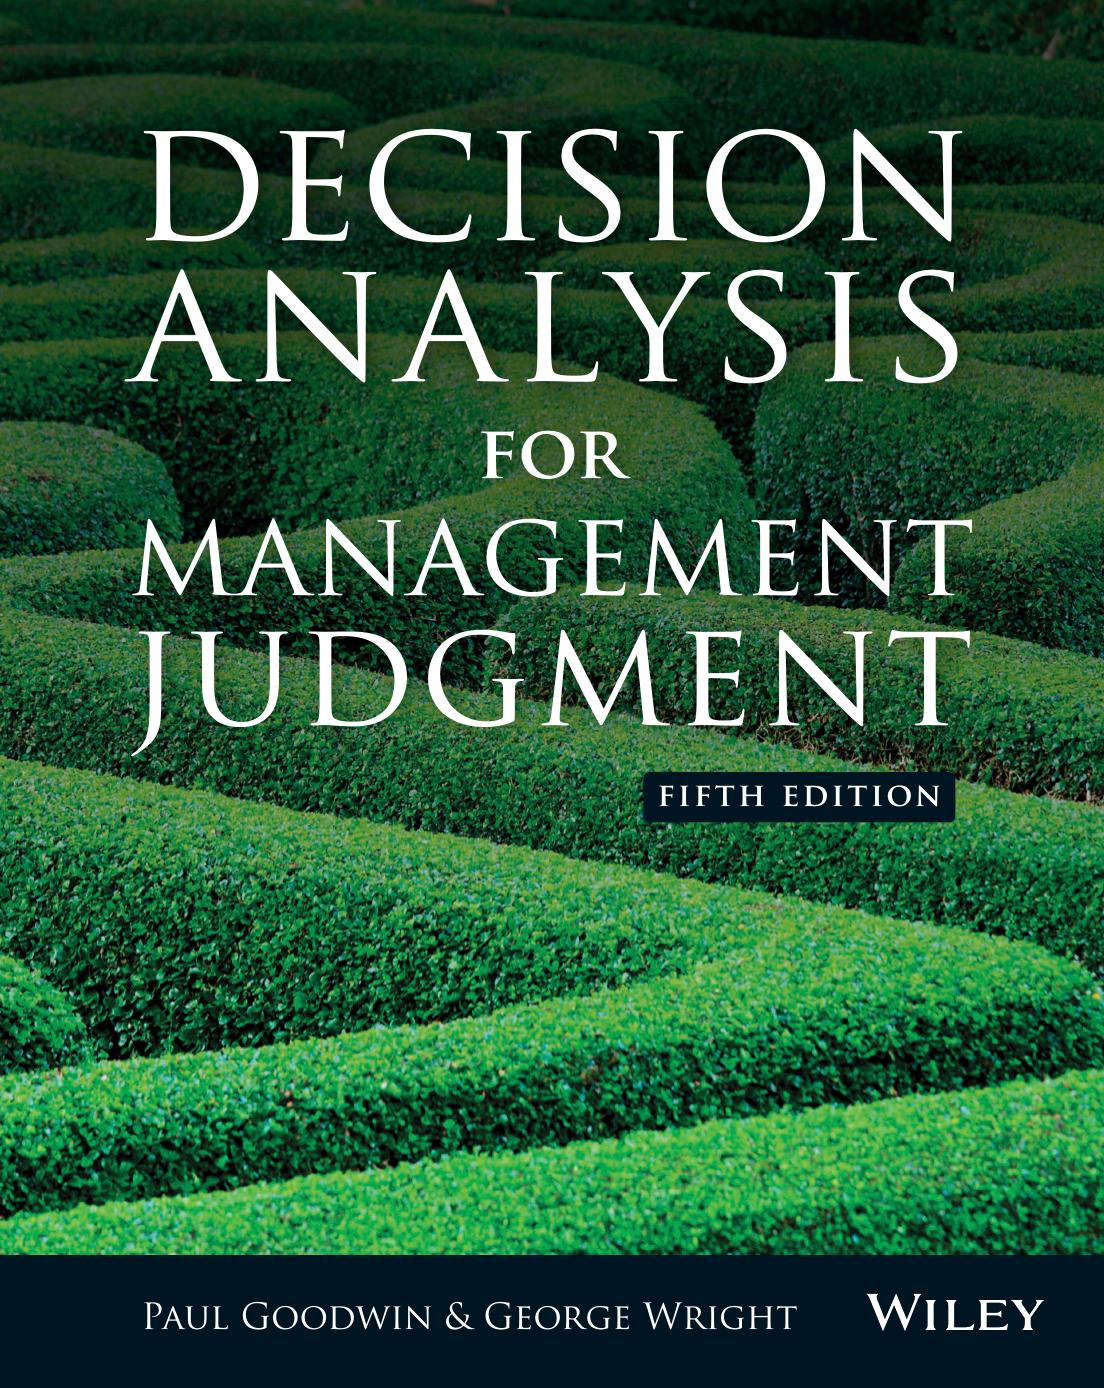 Decision Analysis for Management Judgment, 5th Edition.jpg